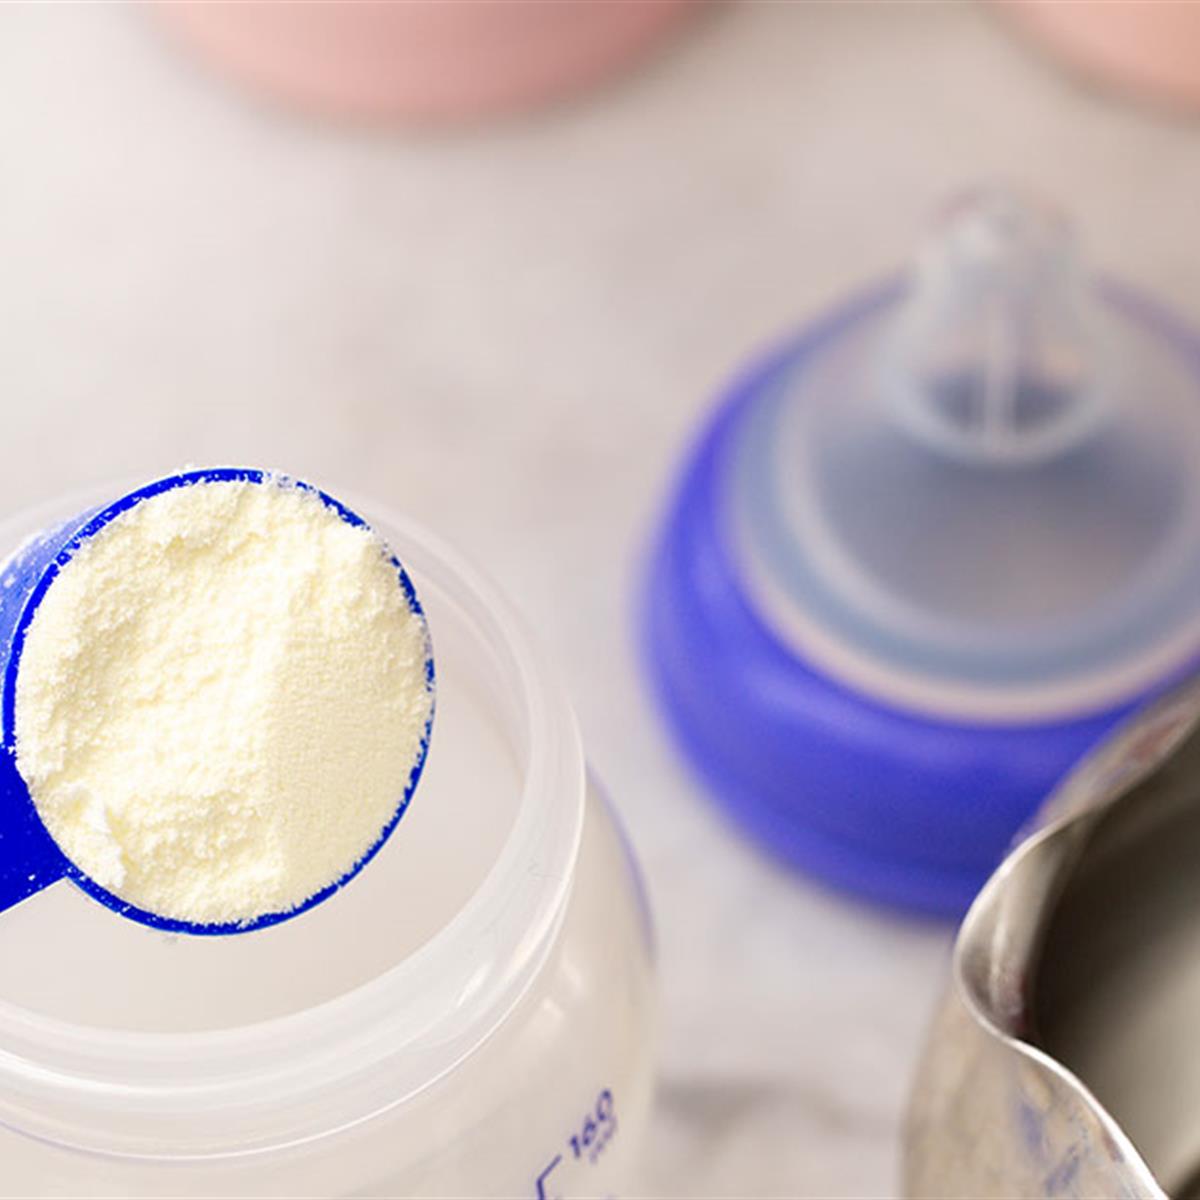 How to Safely Prepare Baby Formula With Water - HealthyChildren.org